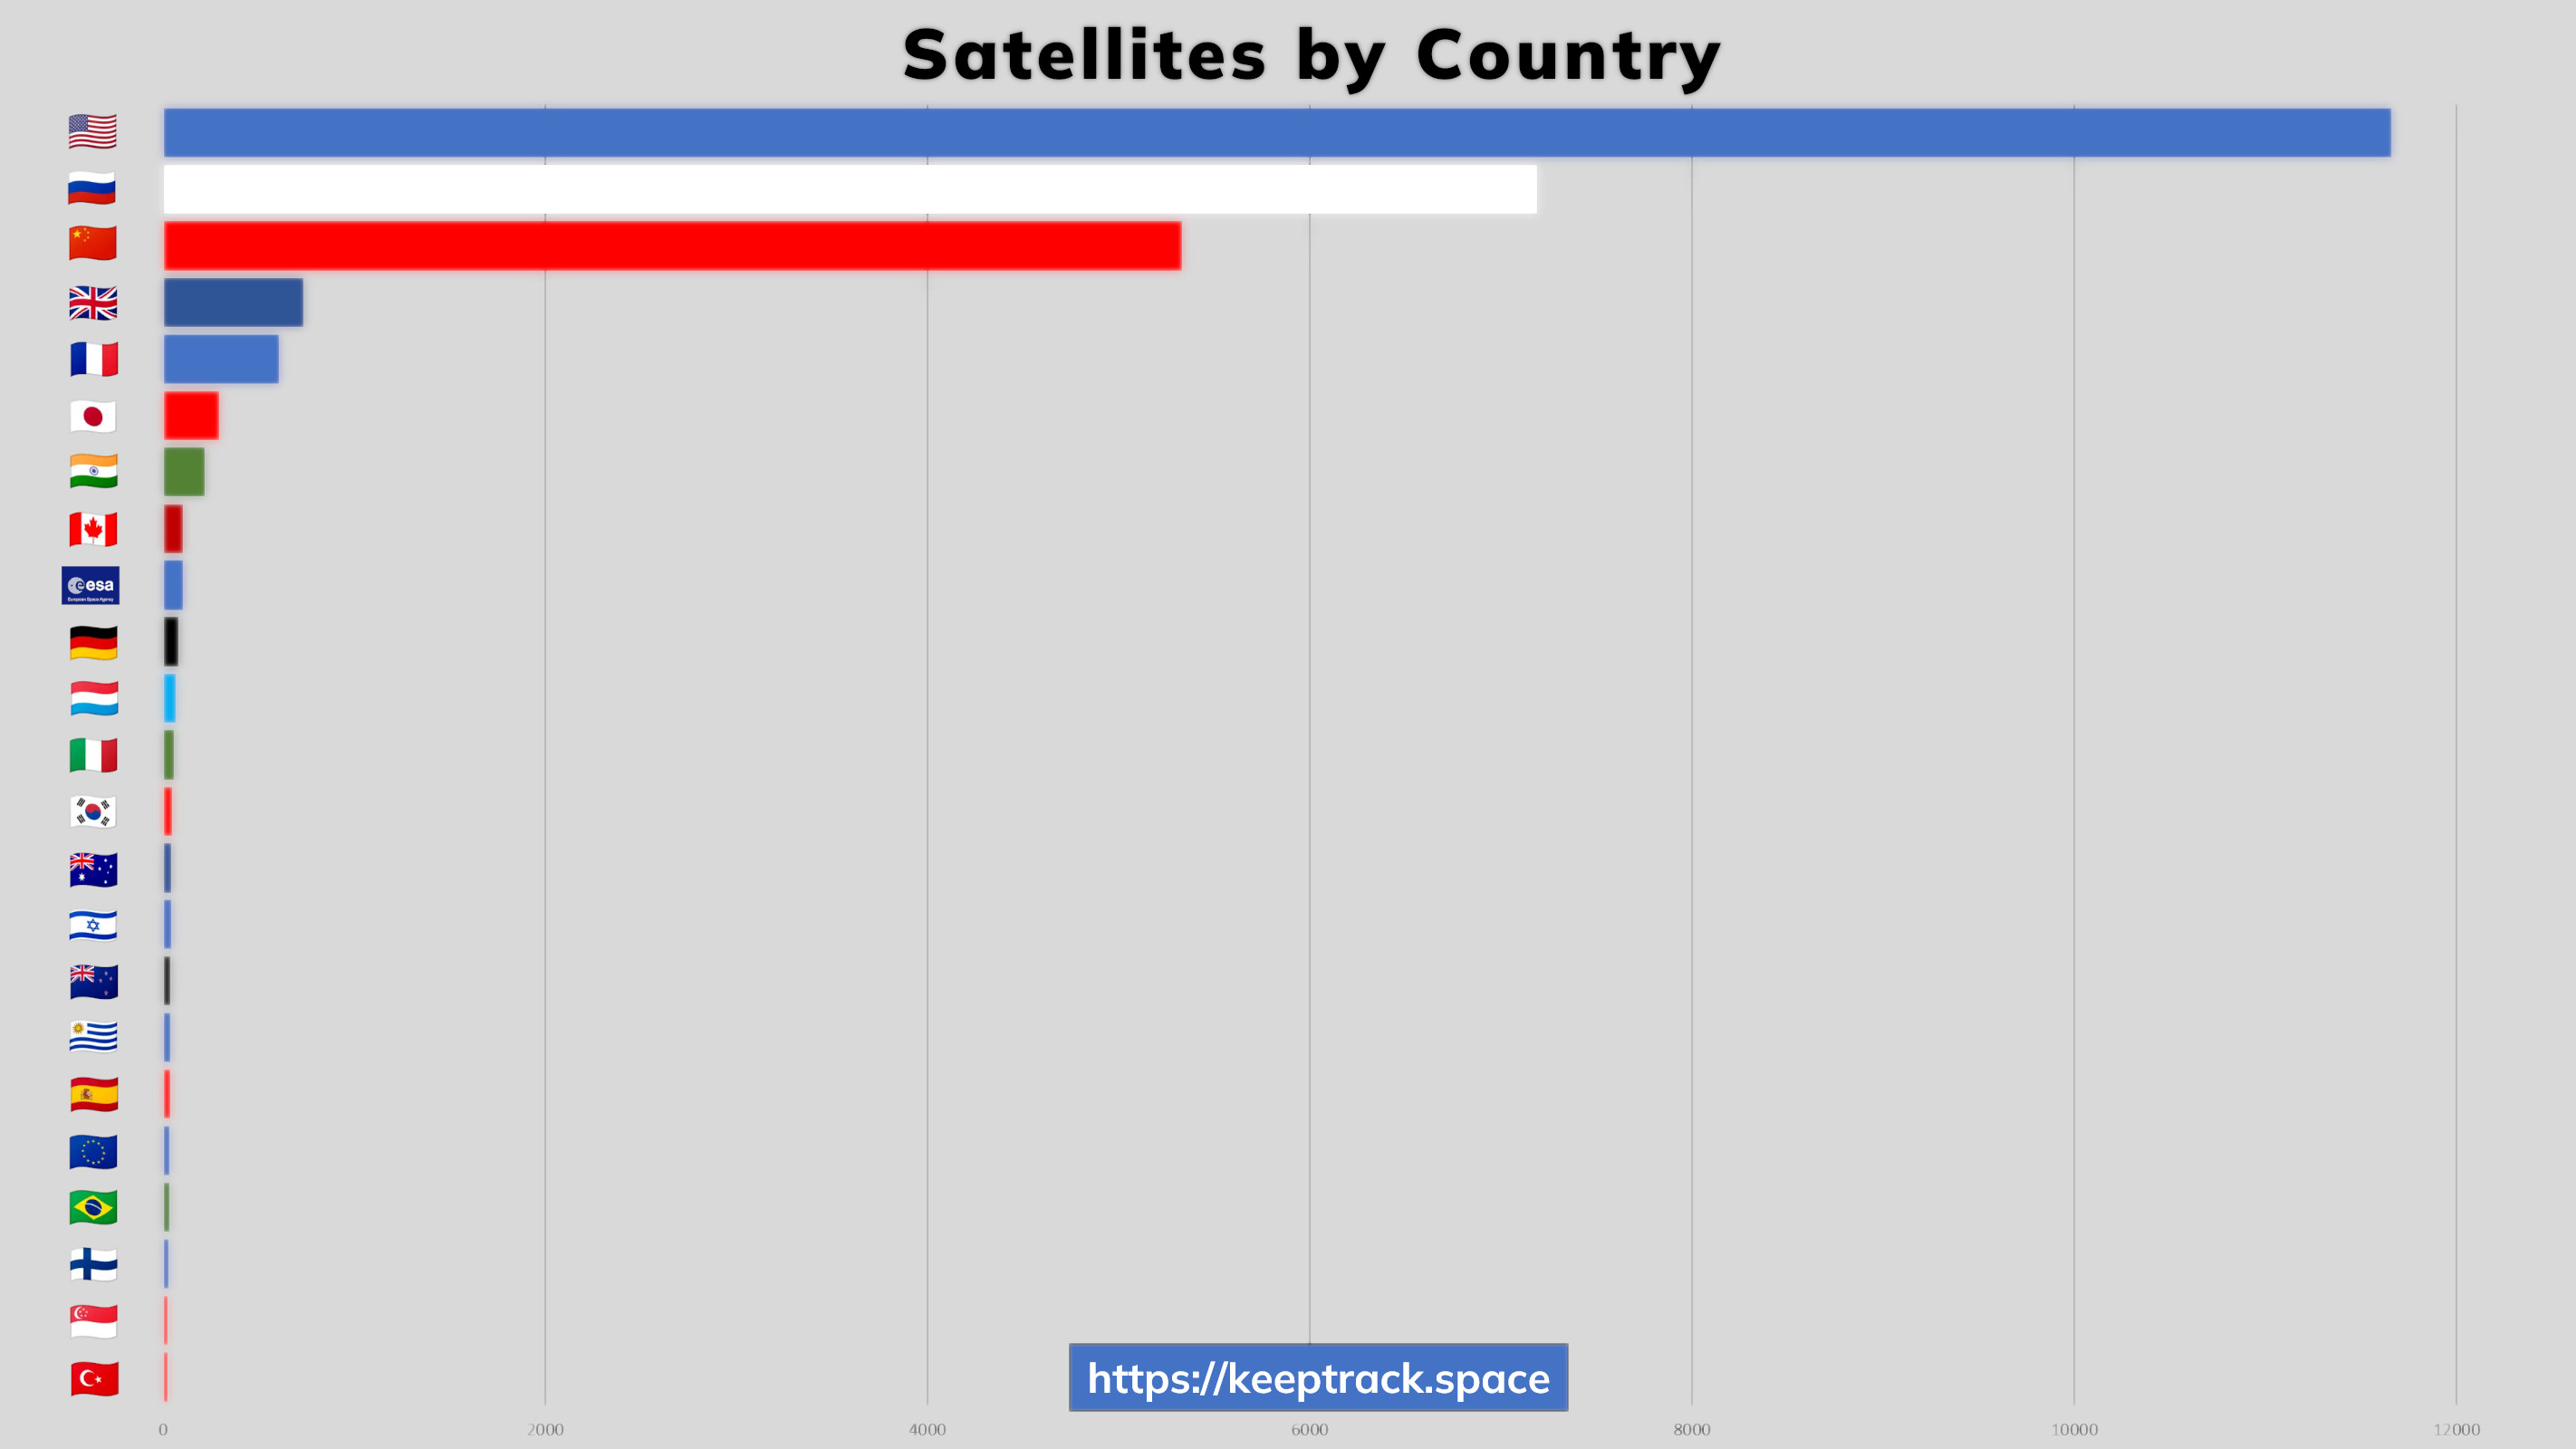 Satellite Counts by Country